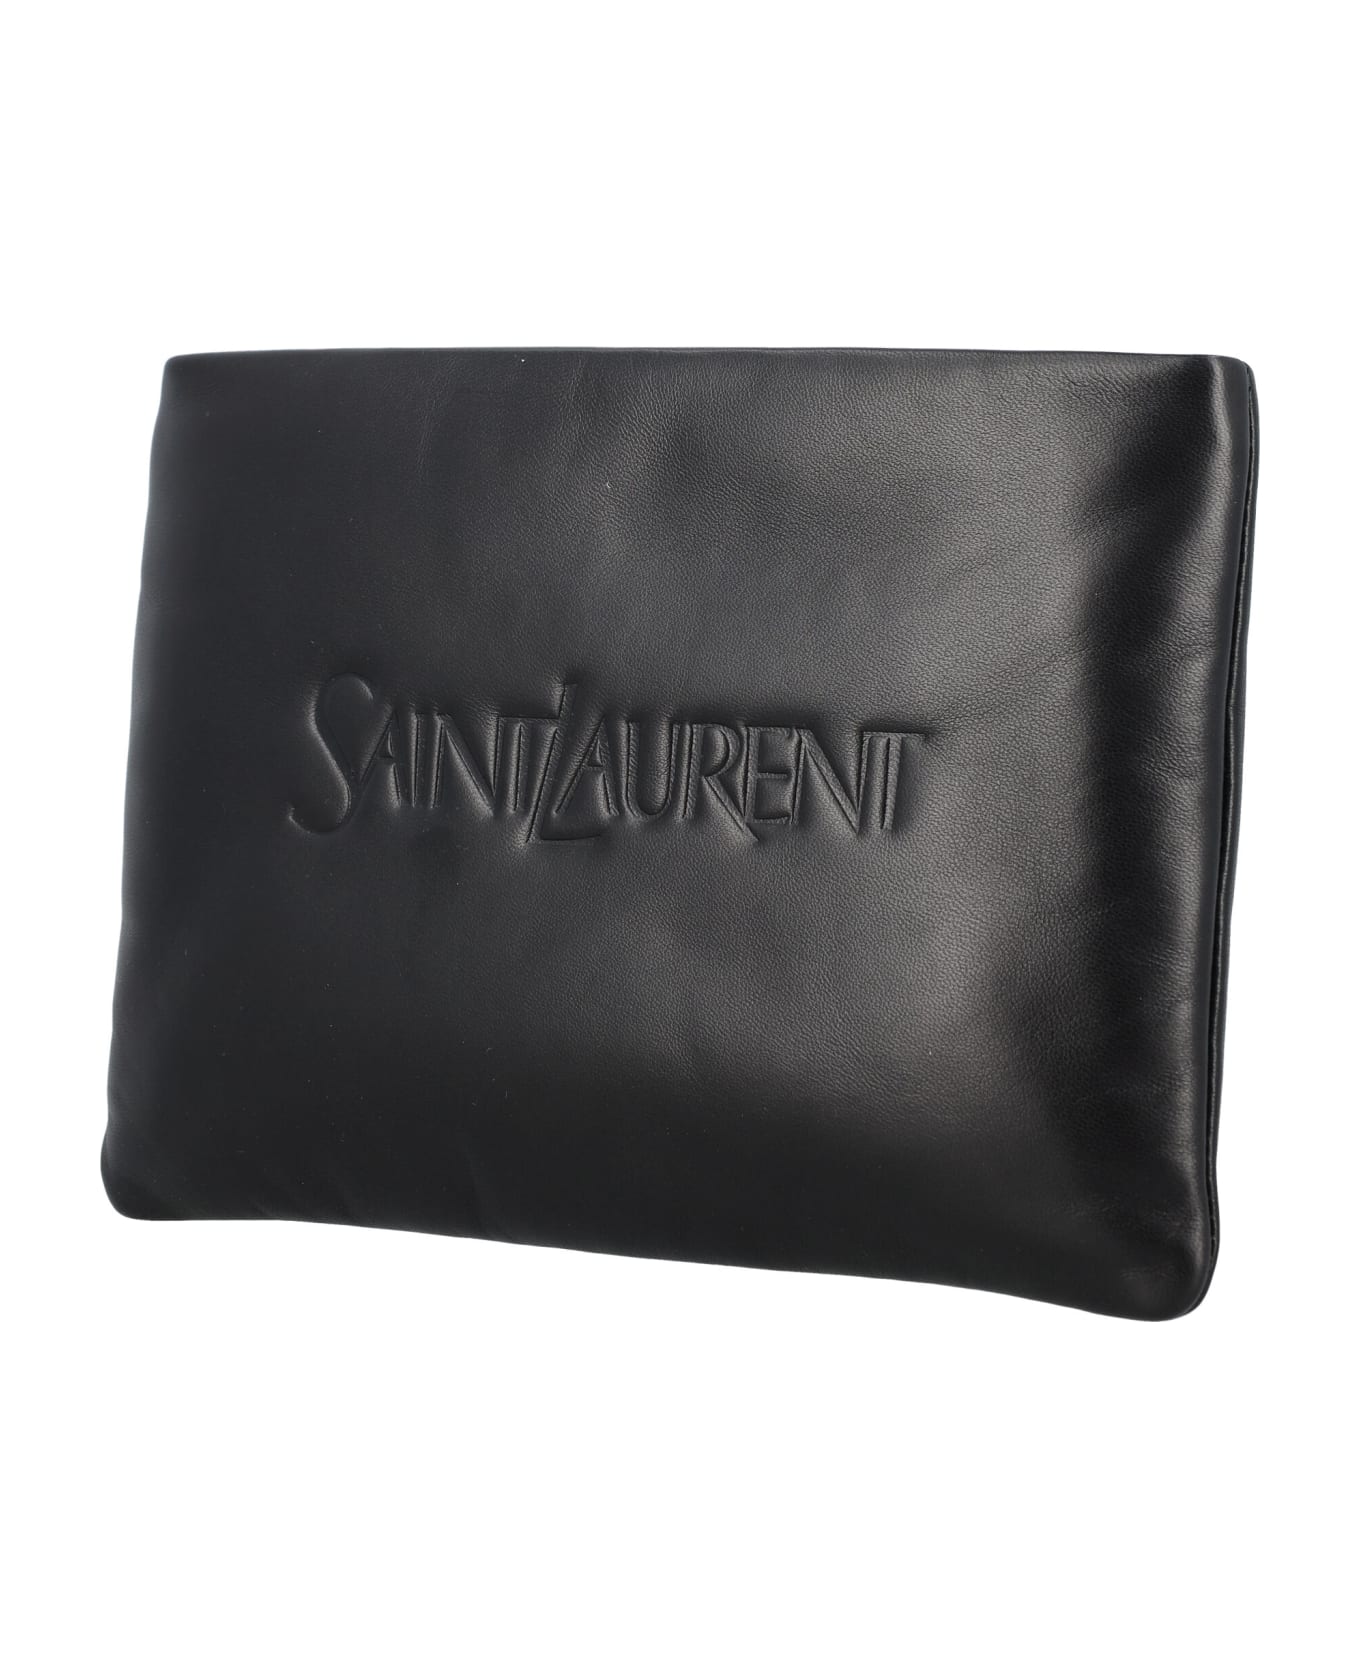 Saint Laurent Padded Leather Clutch Bag With Logo - BLACK バッグ